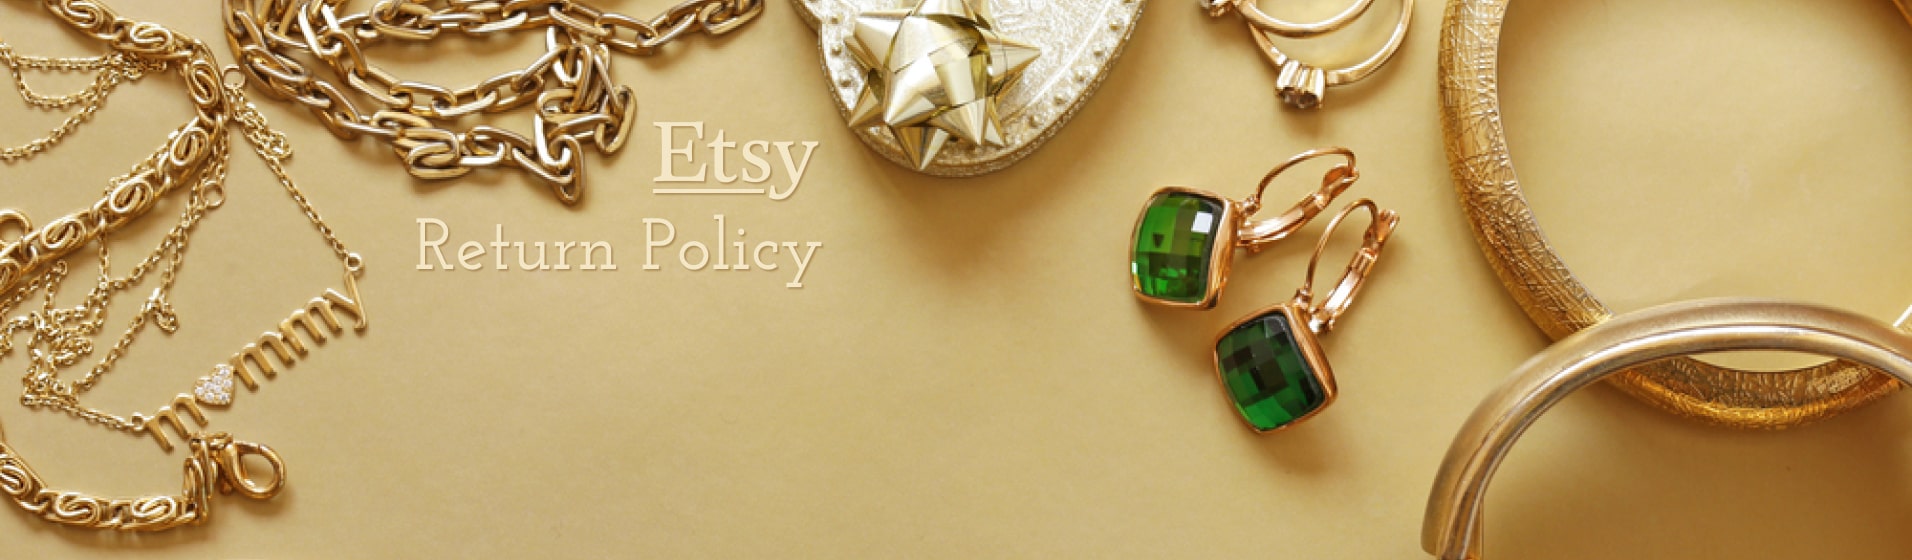 Etsy Return Policy: Why You Need To Check That They Are Correct